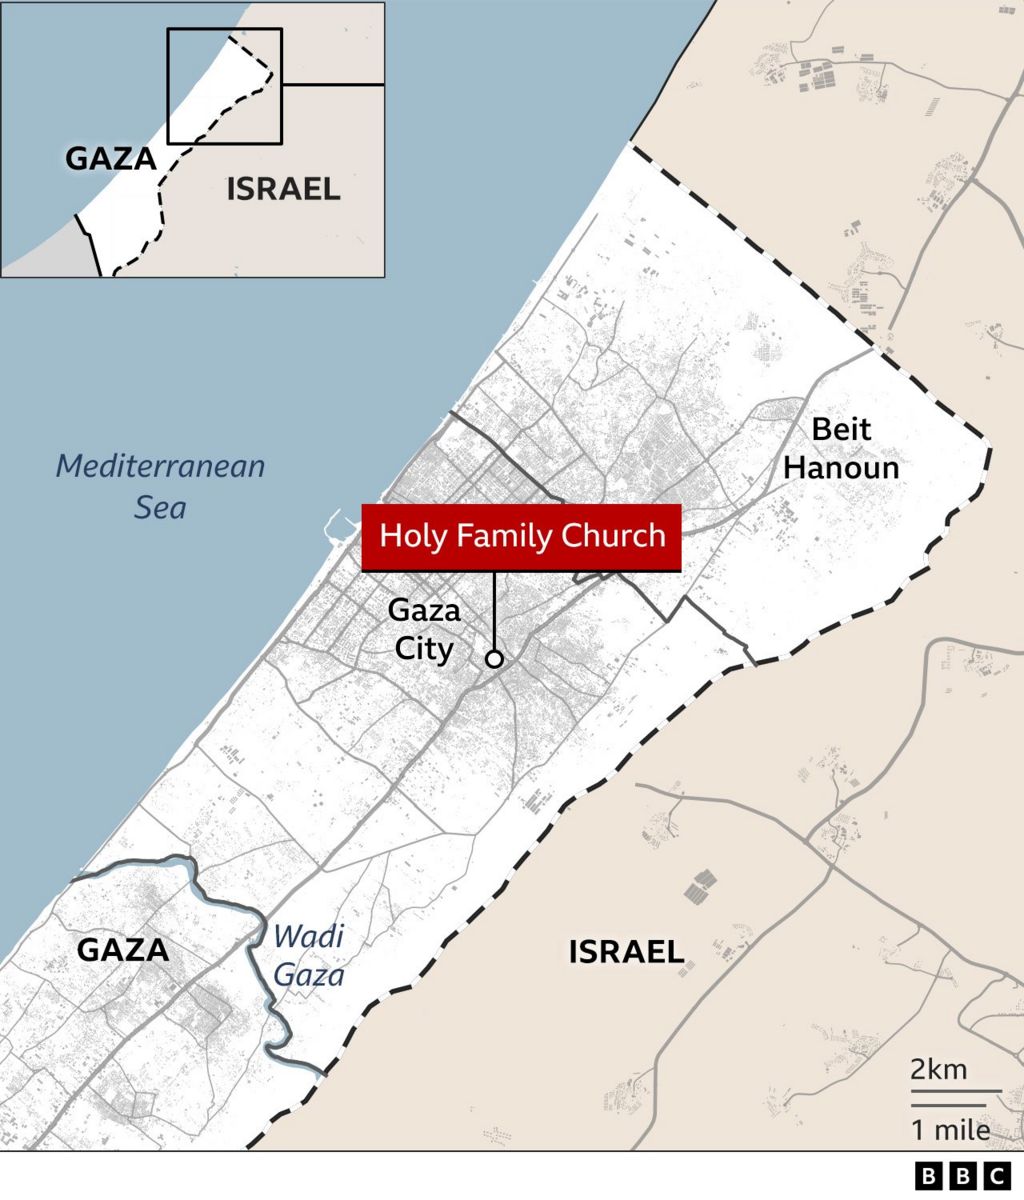 A map showing Holy Family Church in Gaza City